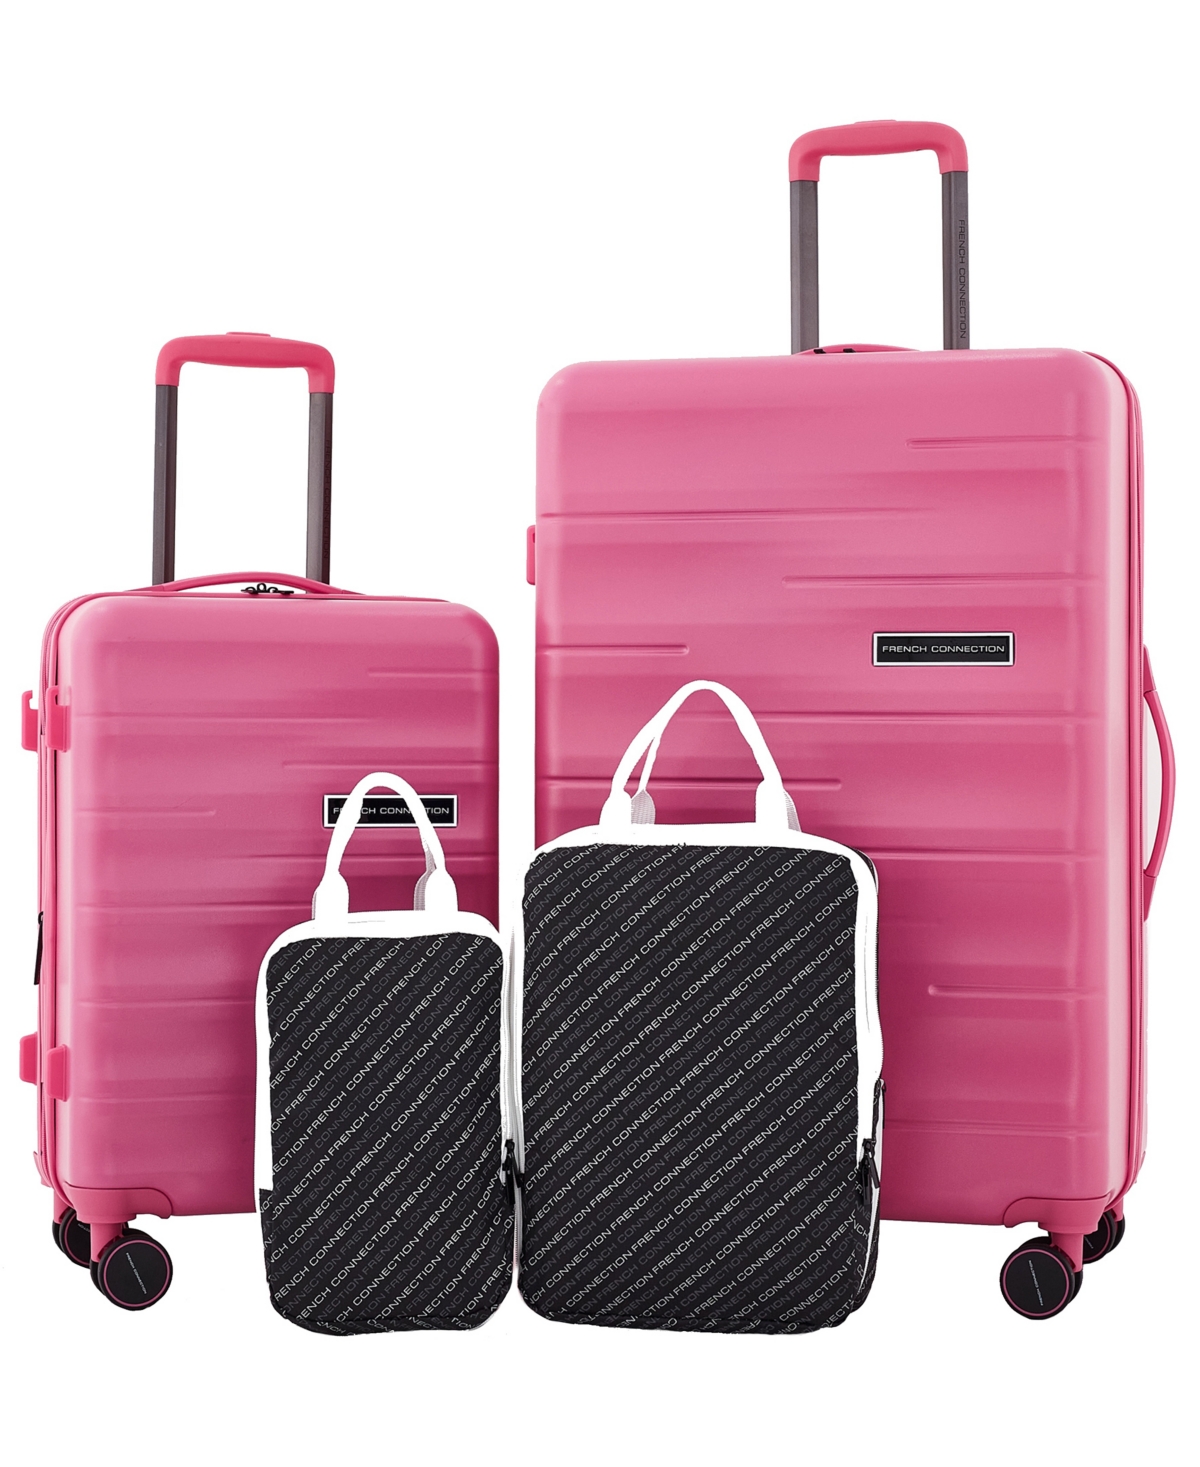 Travelers Club French Connection 4pc Expandable Rolling Hardside Luggage Set In Aurora Pink